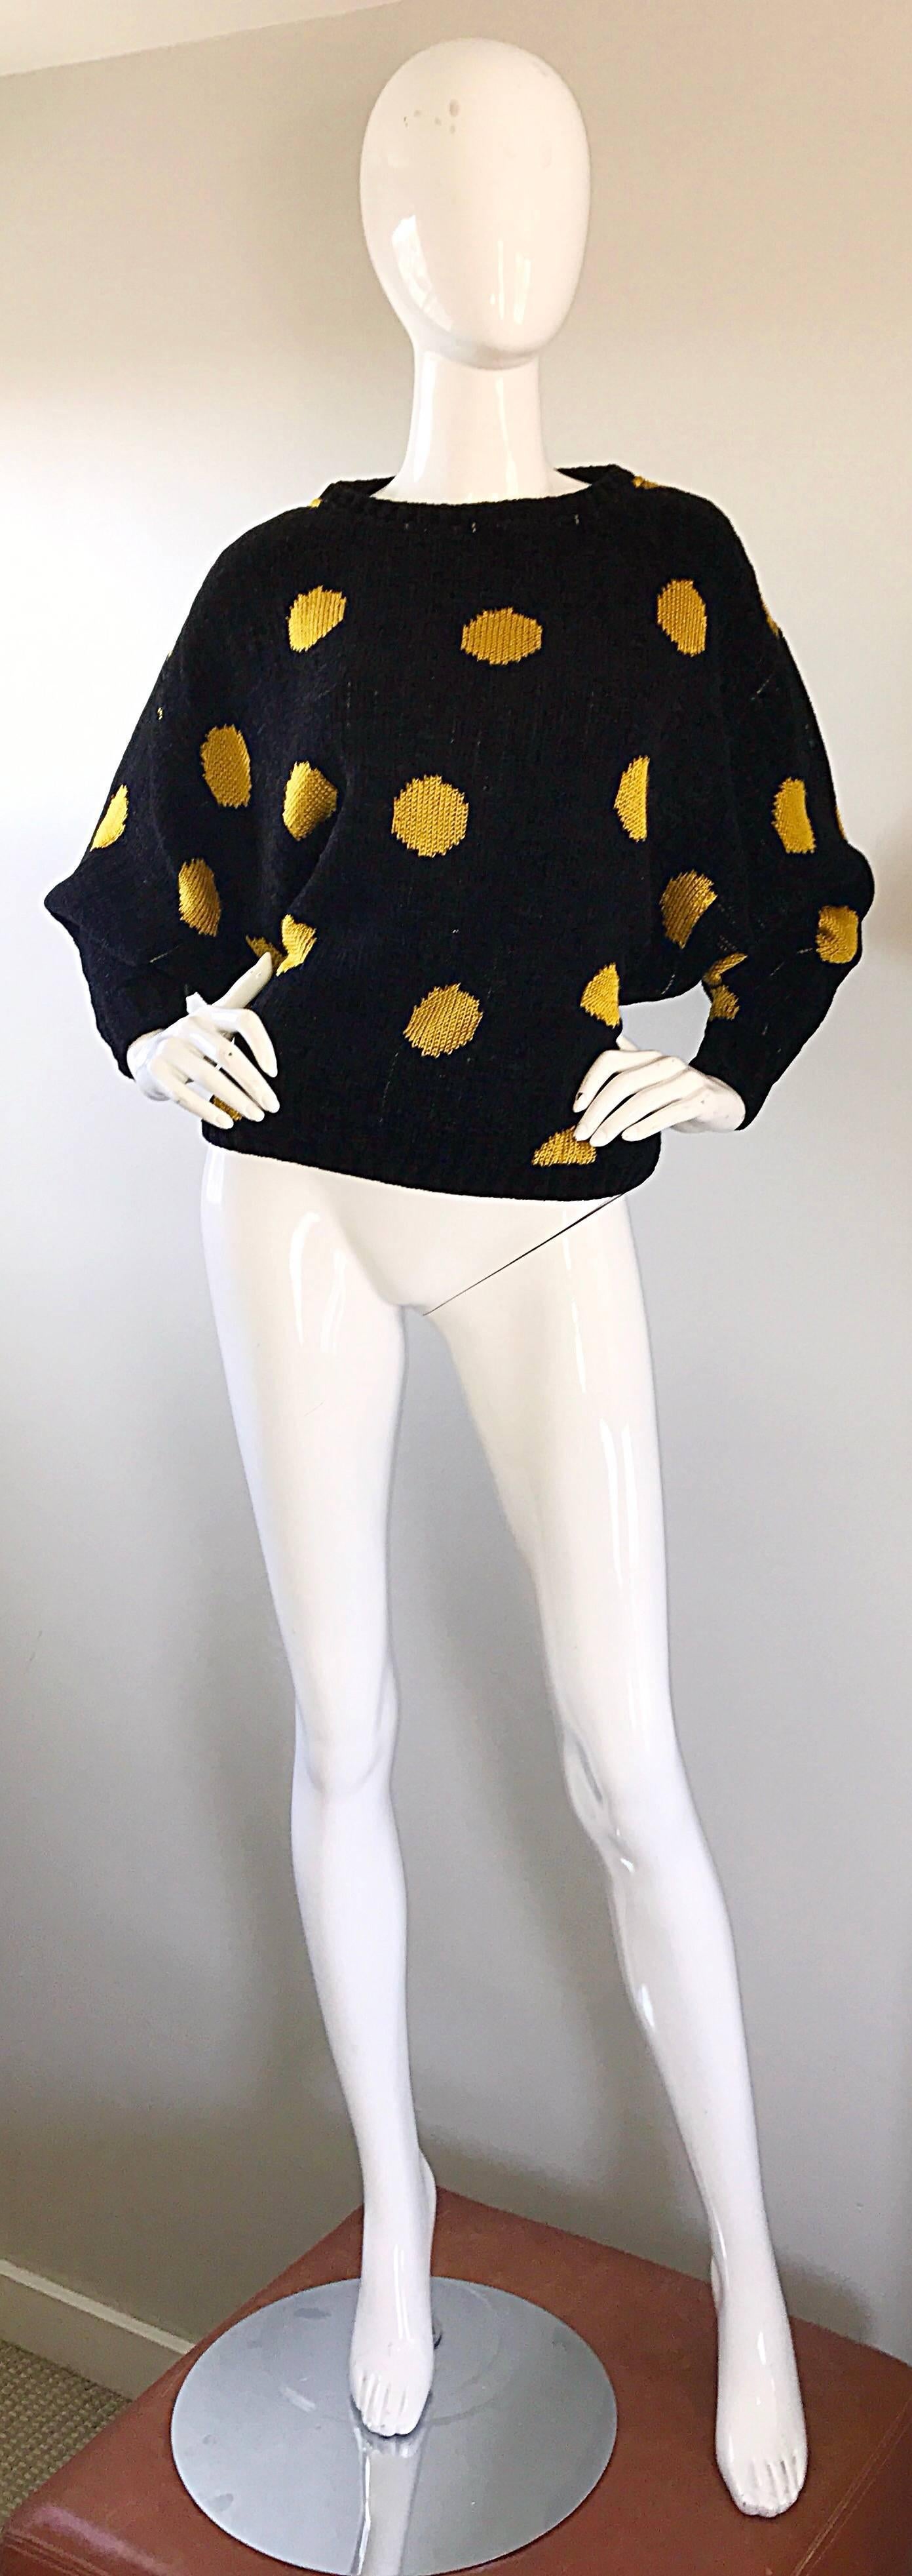 Fabulous and rare early 80s GIANNI VERSACE black and yellow polka dot intarsia sweater! From one of Versace's first collections in 1981. This fantastic piece of fashion history features a black background with yellow polka dots. Super soft chenille